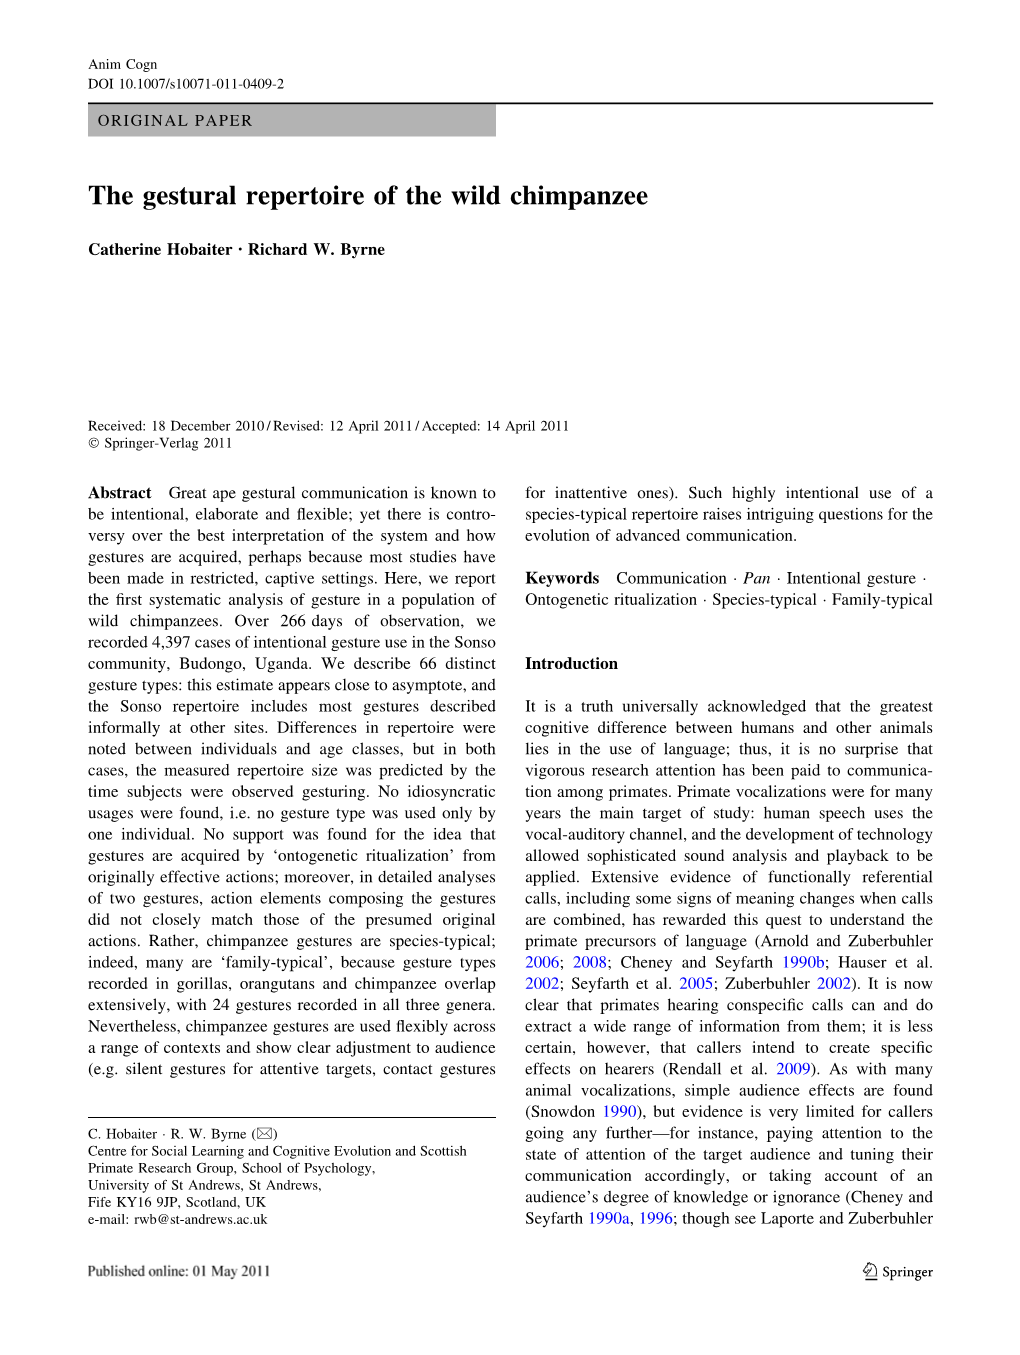 The Gestural Repertoire of the Wild Chimpanzee